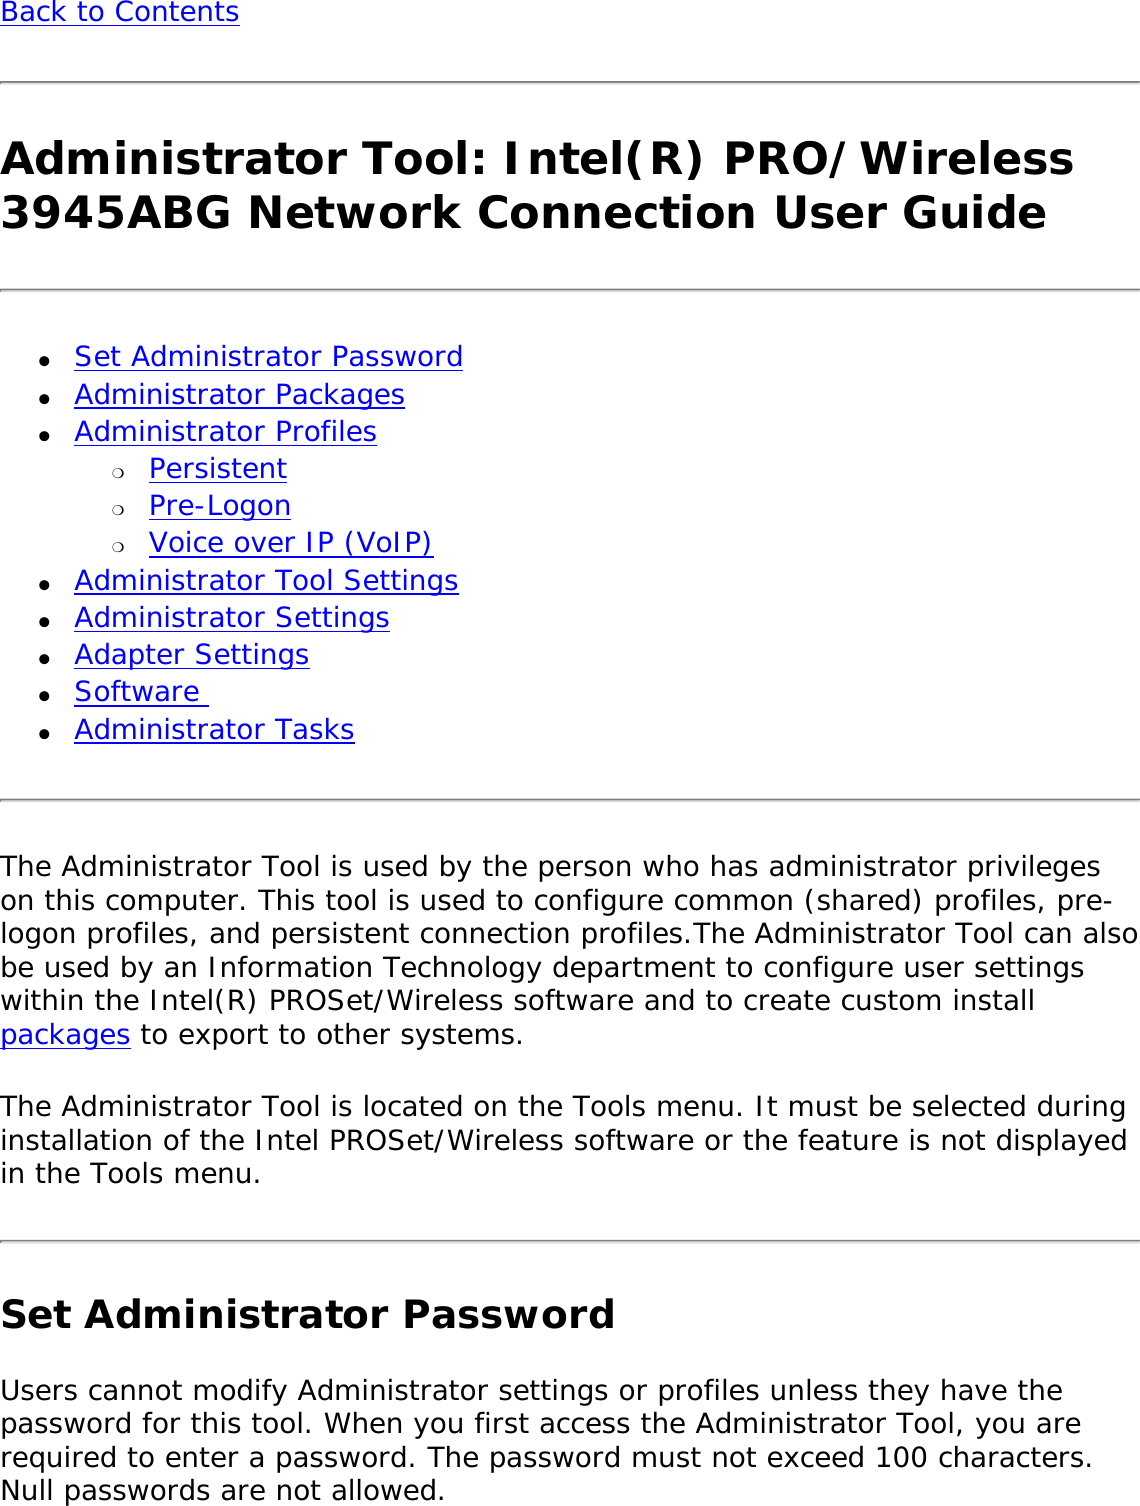 Back to Contents Administrator Tool: Intel(R) PRO/Wireless 3945ABG Network Connection User Guide●     Set Administrator Password ●     Administrator Packages ●     Administrator Profiles ❍     Persistent❍     Pre-Logon❍     Voice over IP (VoIP) ●     Administrator Tool Settings ●     Administrator Settings ●     Adapter Settings●     Software ●     Administrator TasksThe Administrator Tool is used by the person who has administrator privileges on this computer. This tool is used to configure common (shared) profiles, pre-logon profiles, and persistent connection profiles.The Administrator Tool can also be used by an Information Technology department to configure user settings within the Intel(R) PROSet/Wireless software and to create custom install packages to export to other systems. The Administrator Tool is located on the Tools menu. It must be selected during installation of the Intel PROSet/Wireless software or the feature is not displayed in the Tools menu. Set Administrator Password Users cannot modify Administrator settings or profiles unless they have the password for this tool. When you first access the Administrator Tool, you are required to enter a password. The password must not exceed 100 characters. Null passwords are not allowed. 